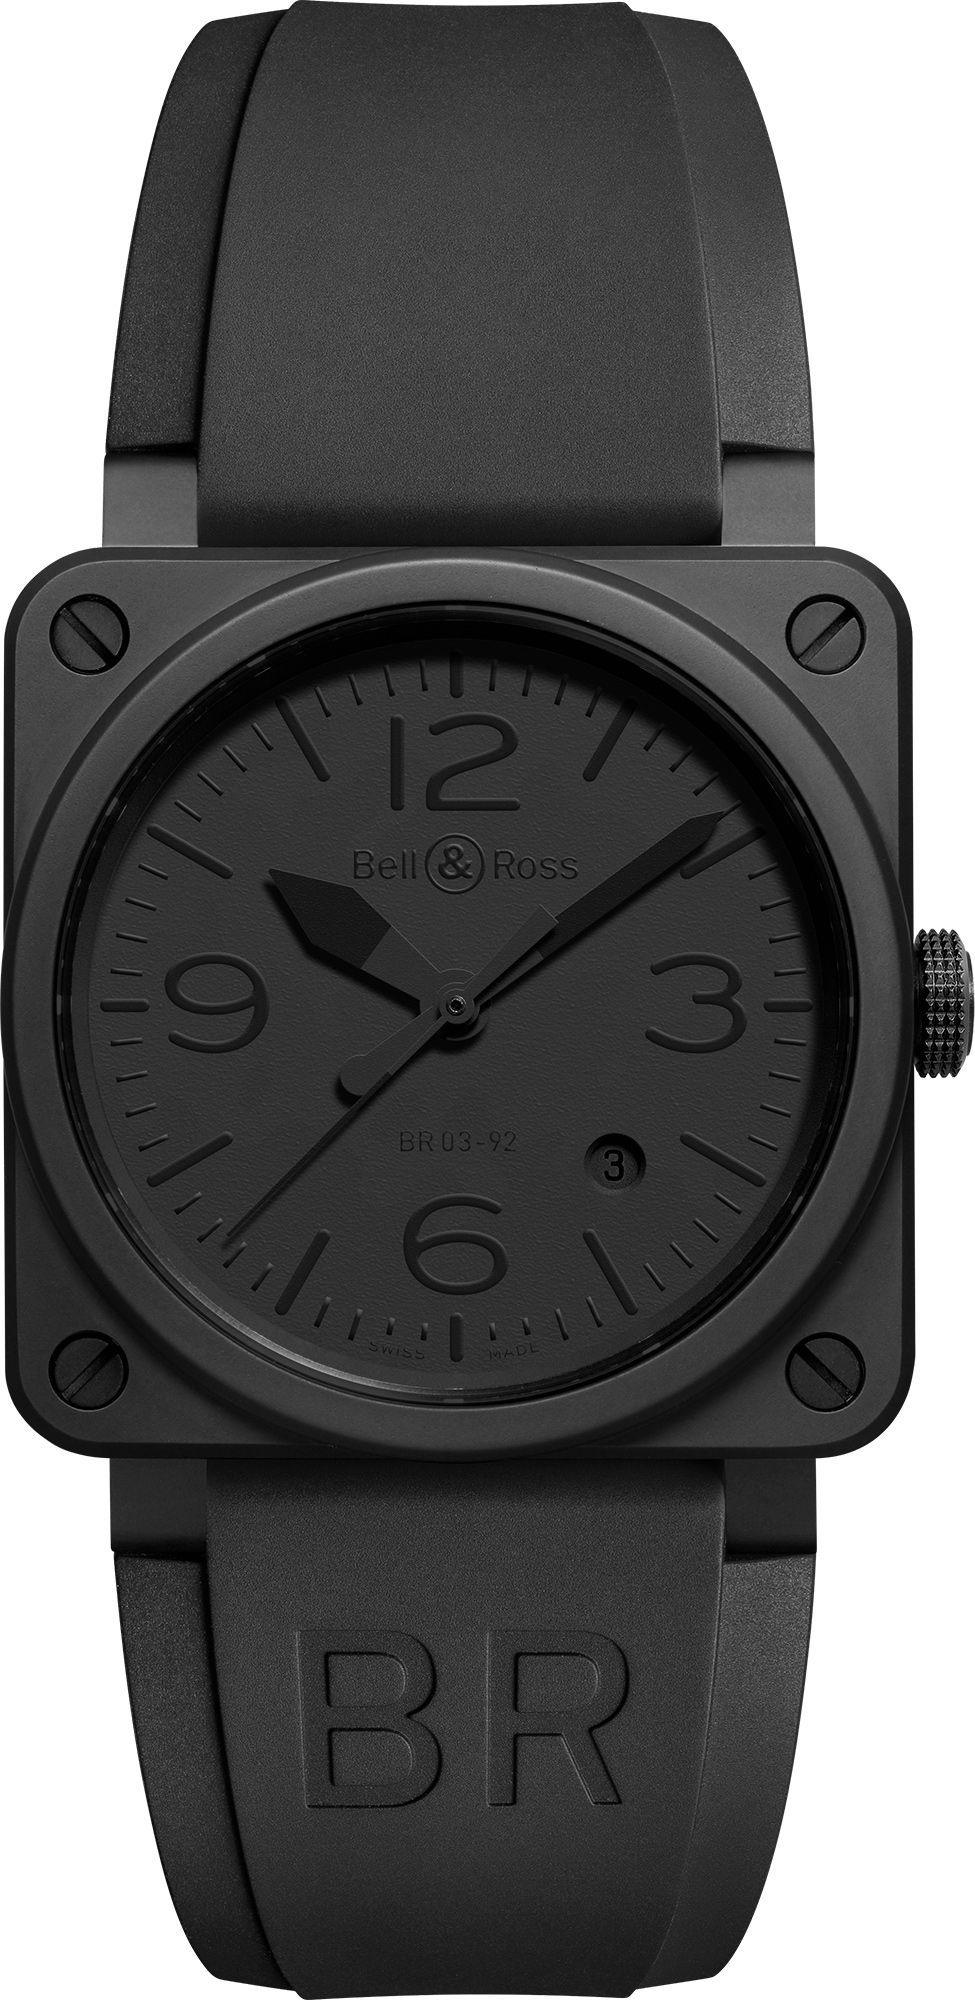 Bell & Ross Instruments BR 03 Auto Black Dial 42 mm Automatic Watch For Men - 1